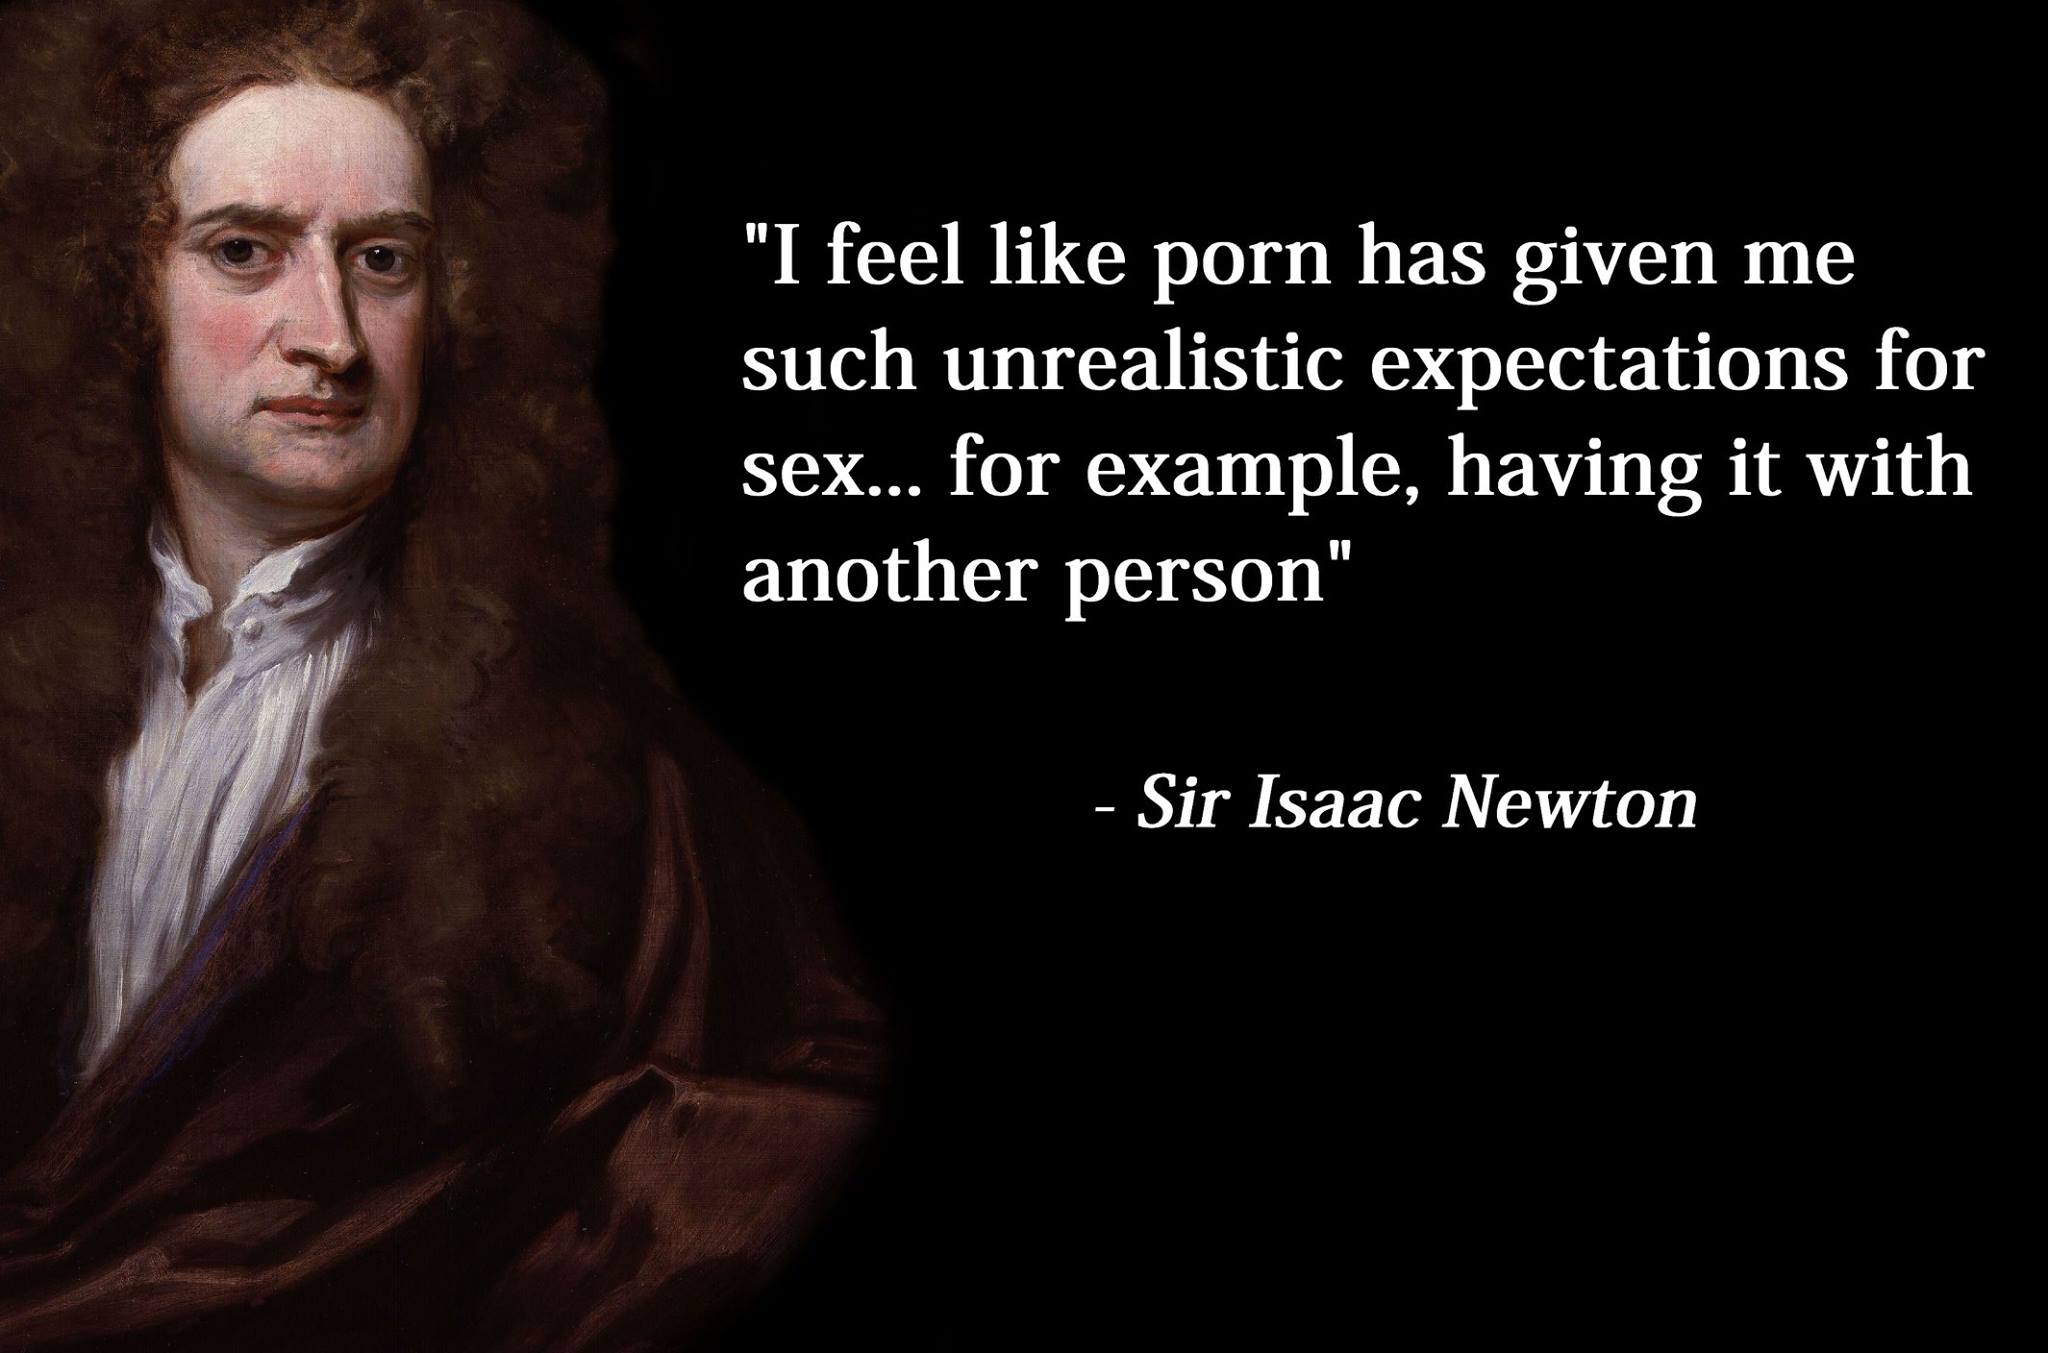 i feel like porn has given me such unrealistic expectations for sex, for example having it with another person, sir isaac newton